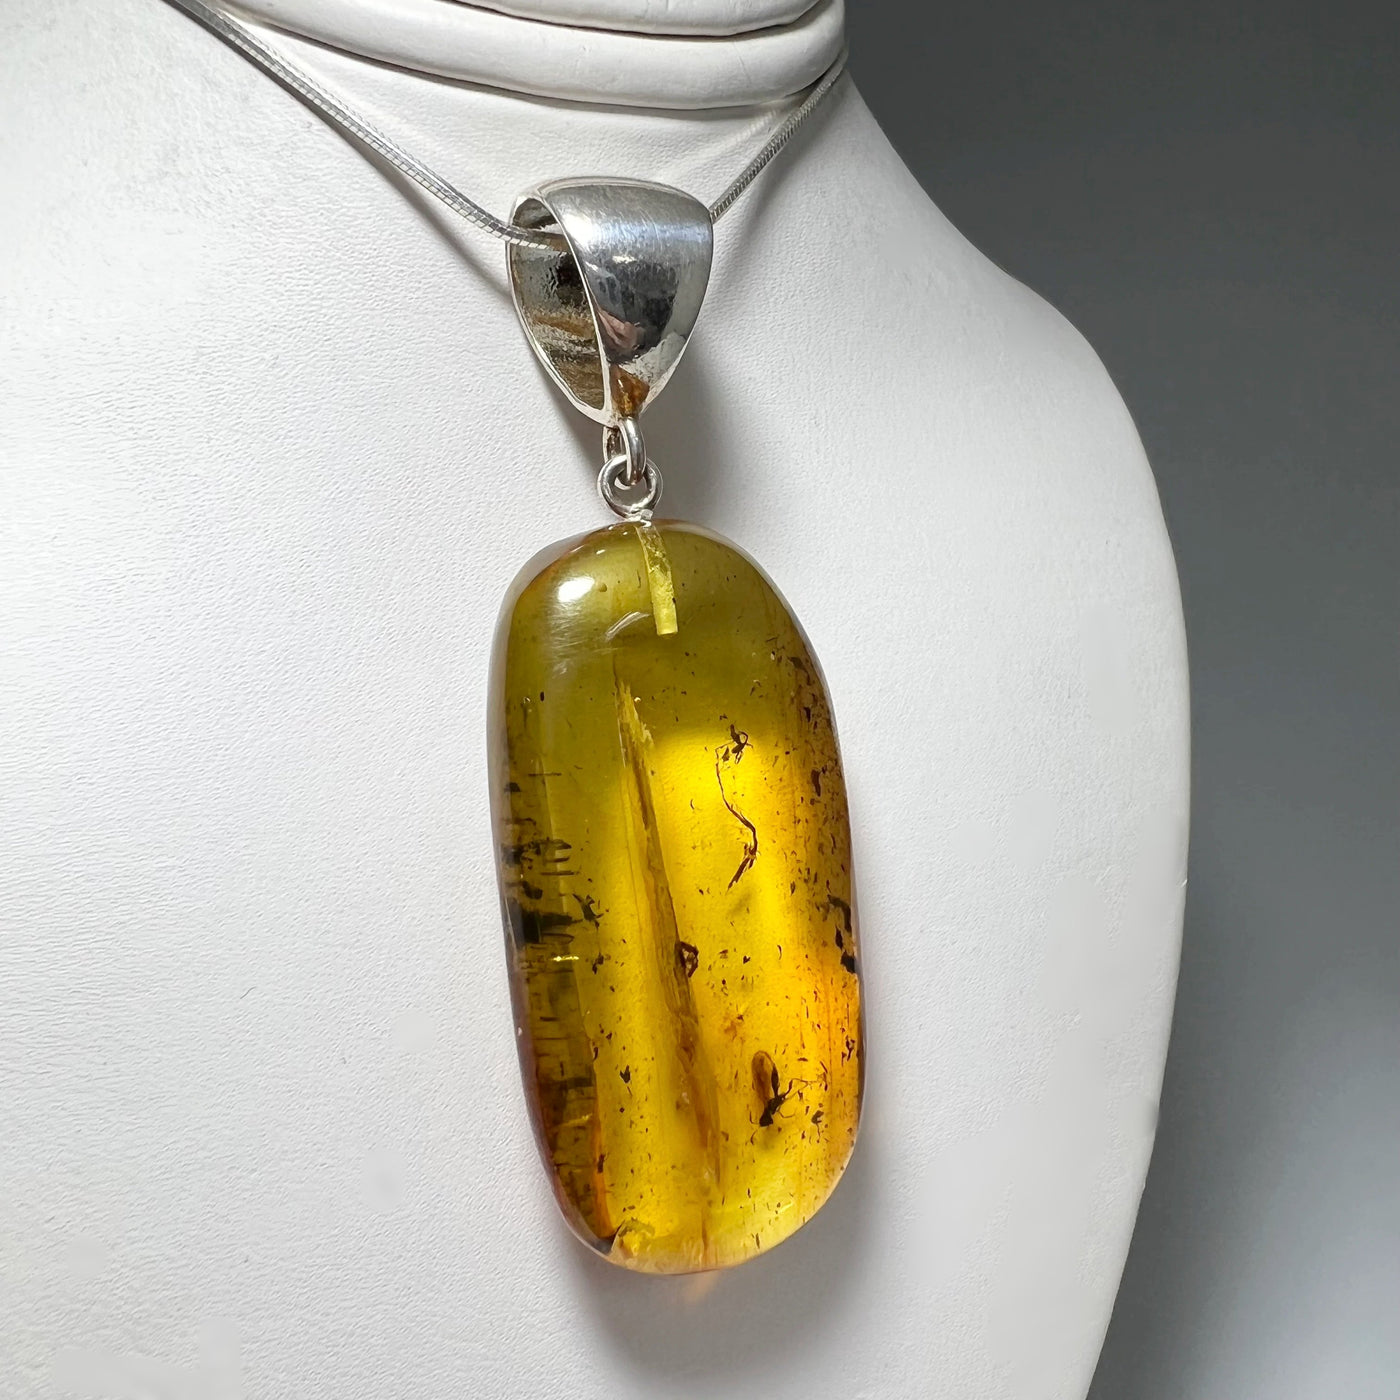 Amber Pendant with Preserved Insect Inclusion